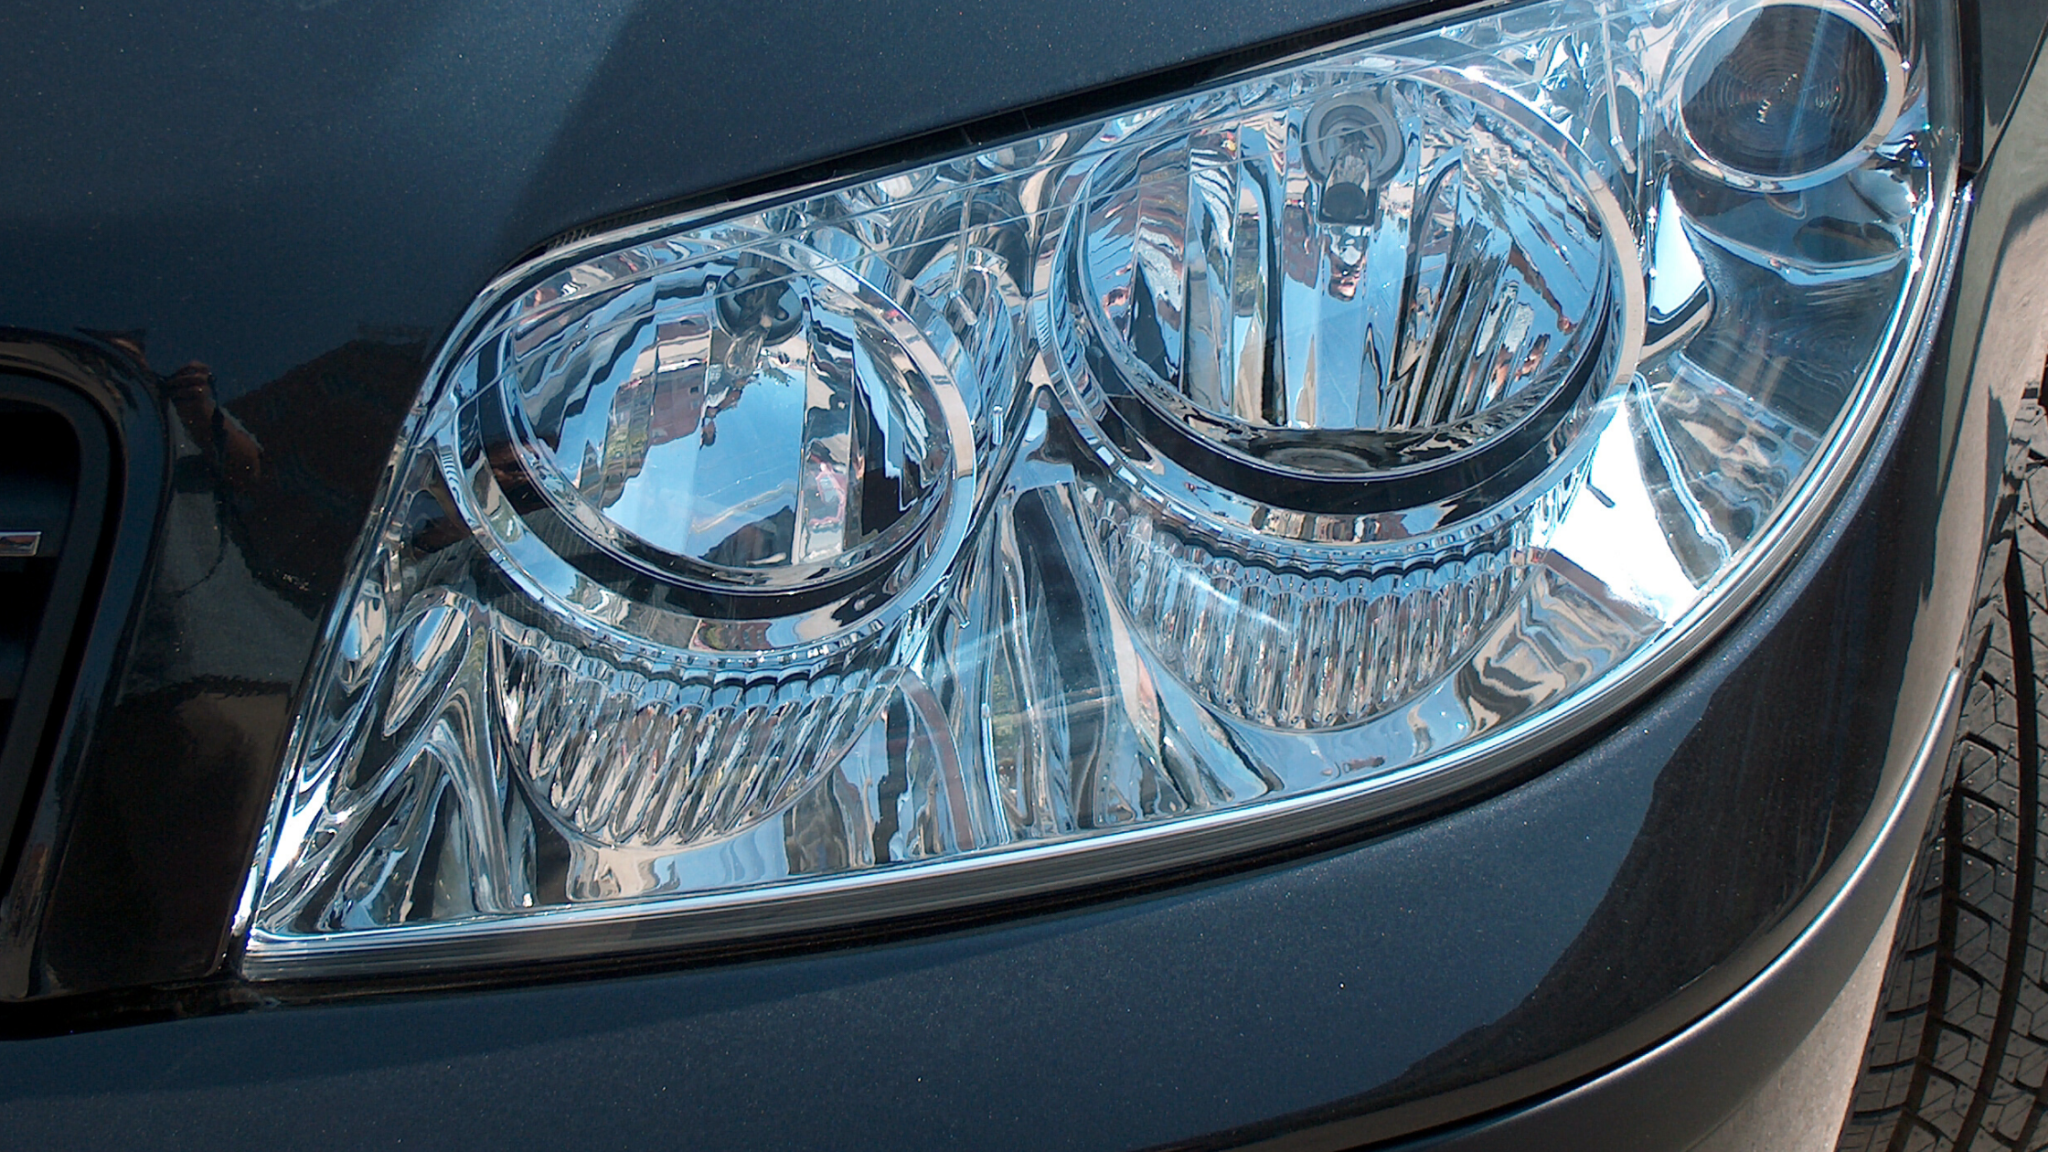 All that you need to know about your vehicle’s Headlight Restoration